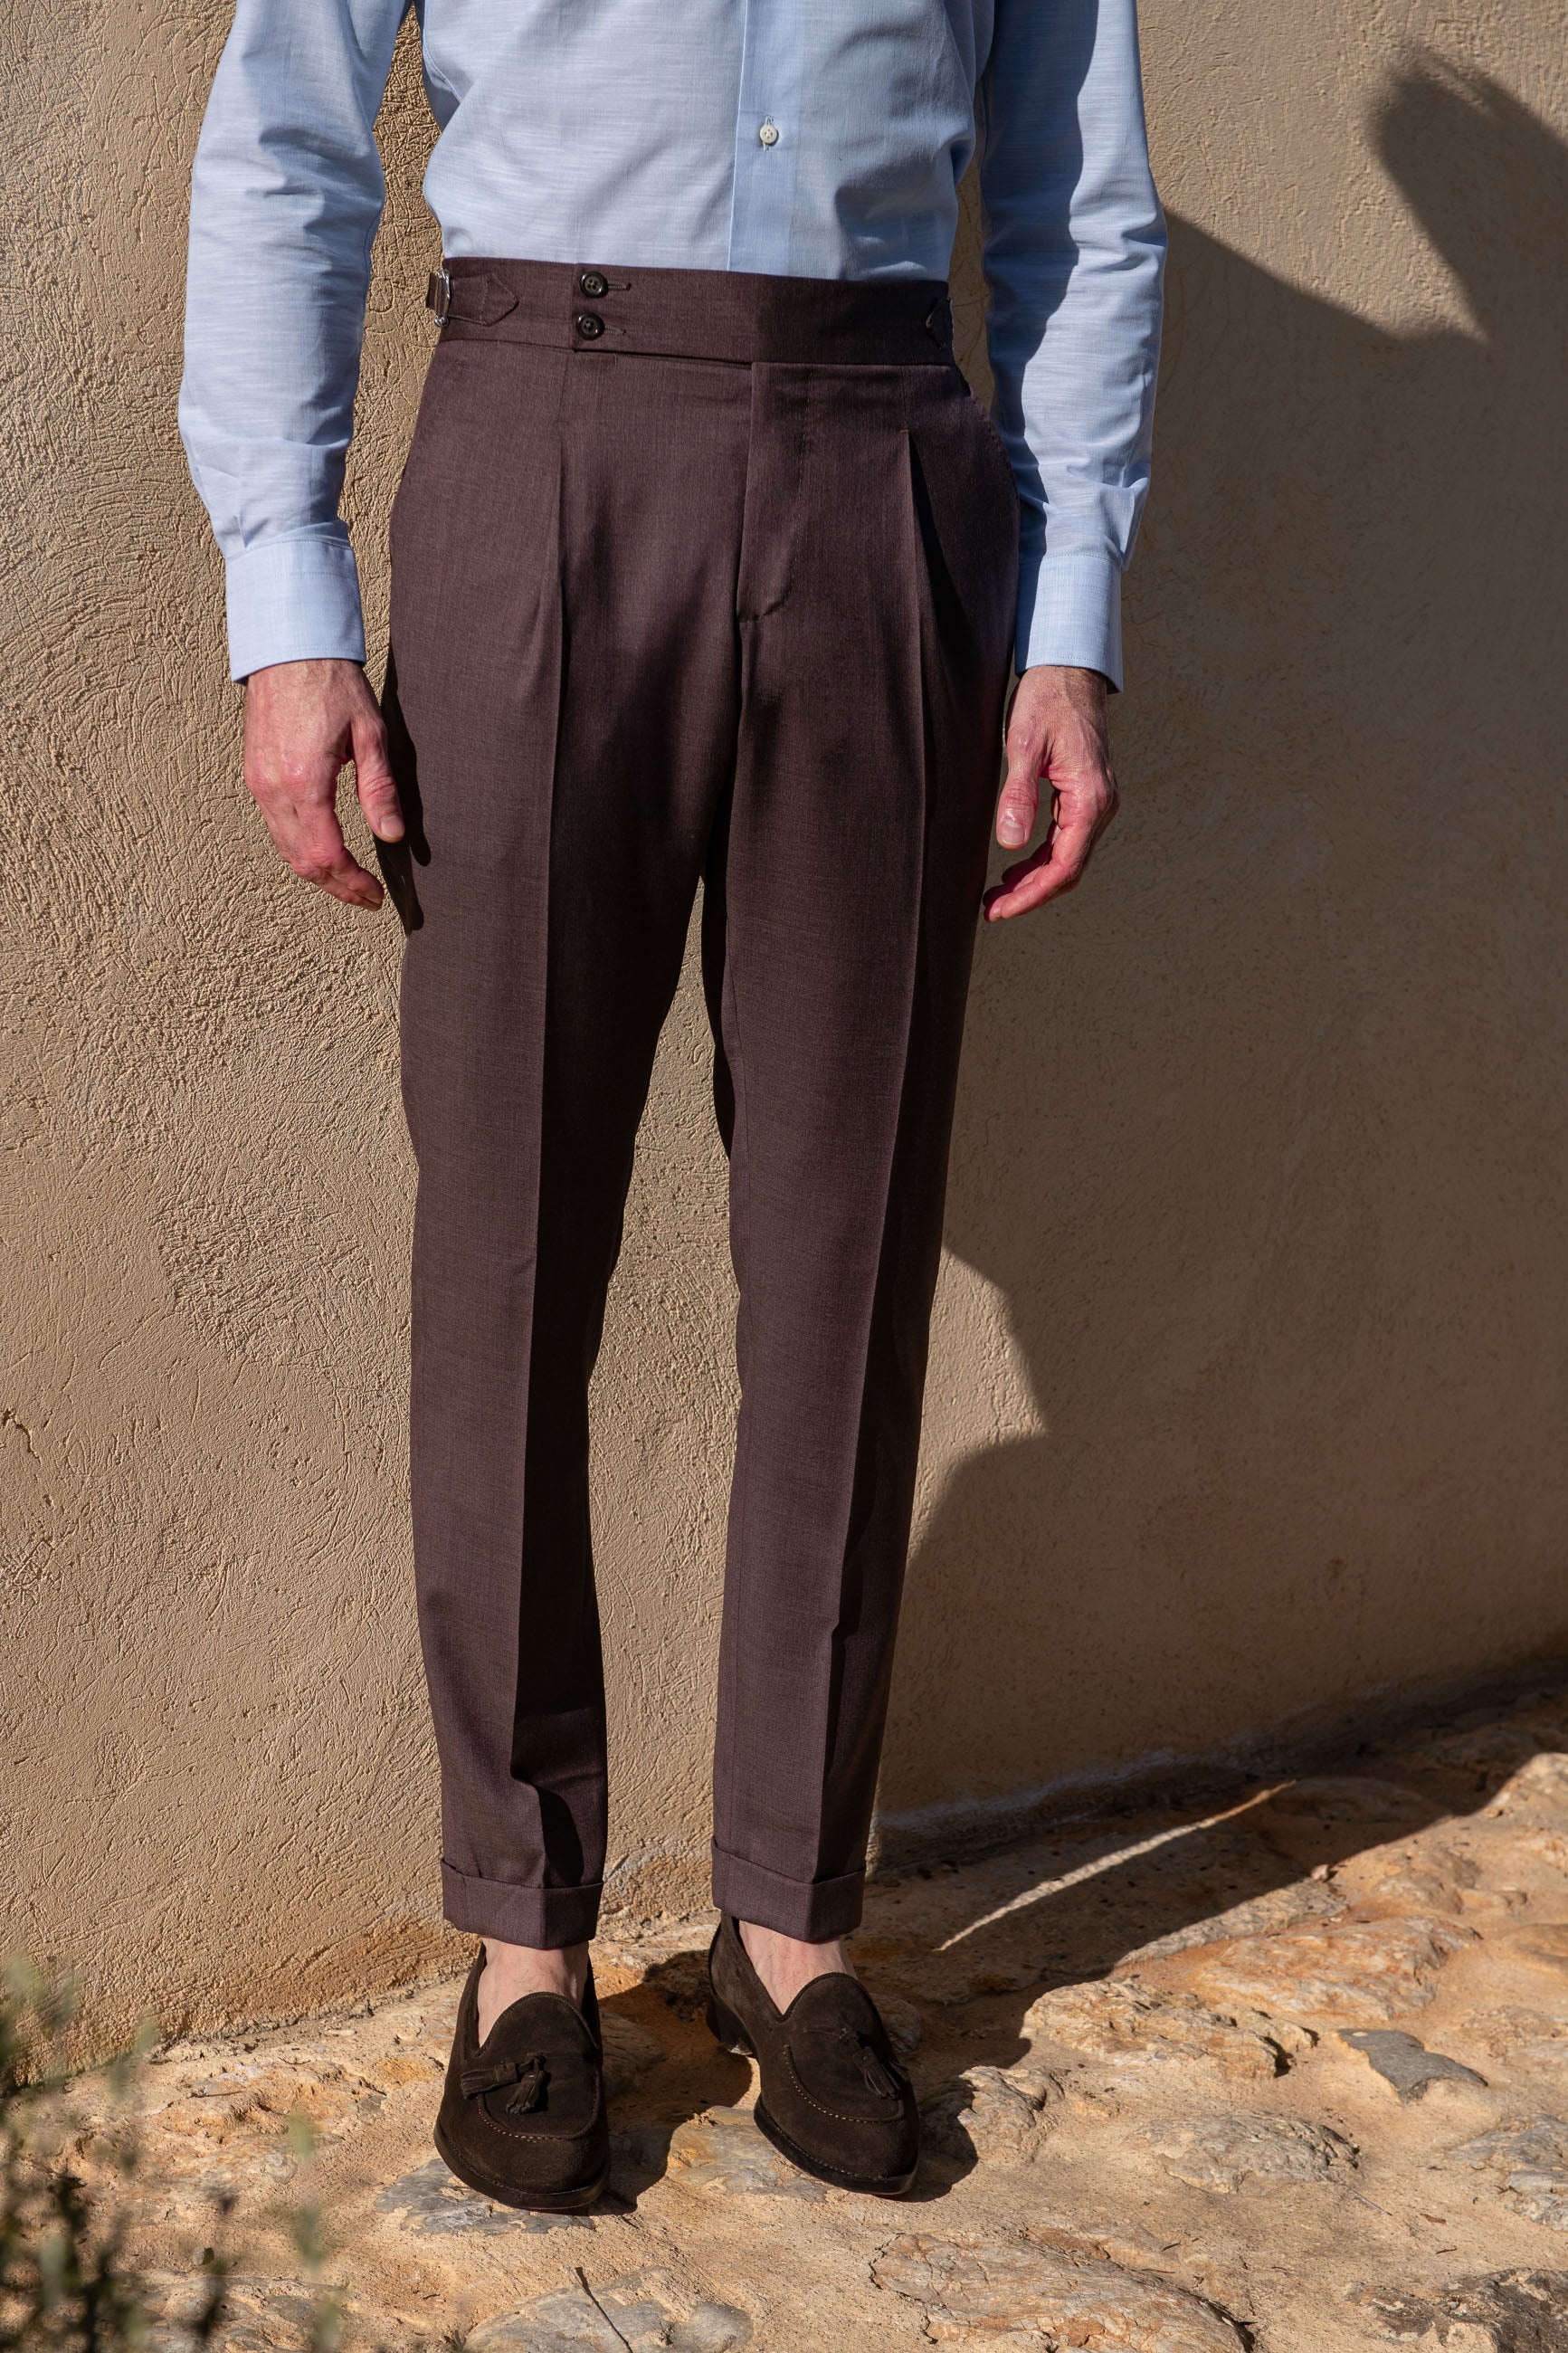 Bordeaux Trousers "Soragna Capsule Collection" - Made in Italy